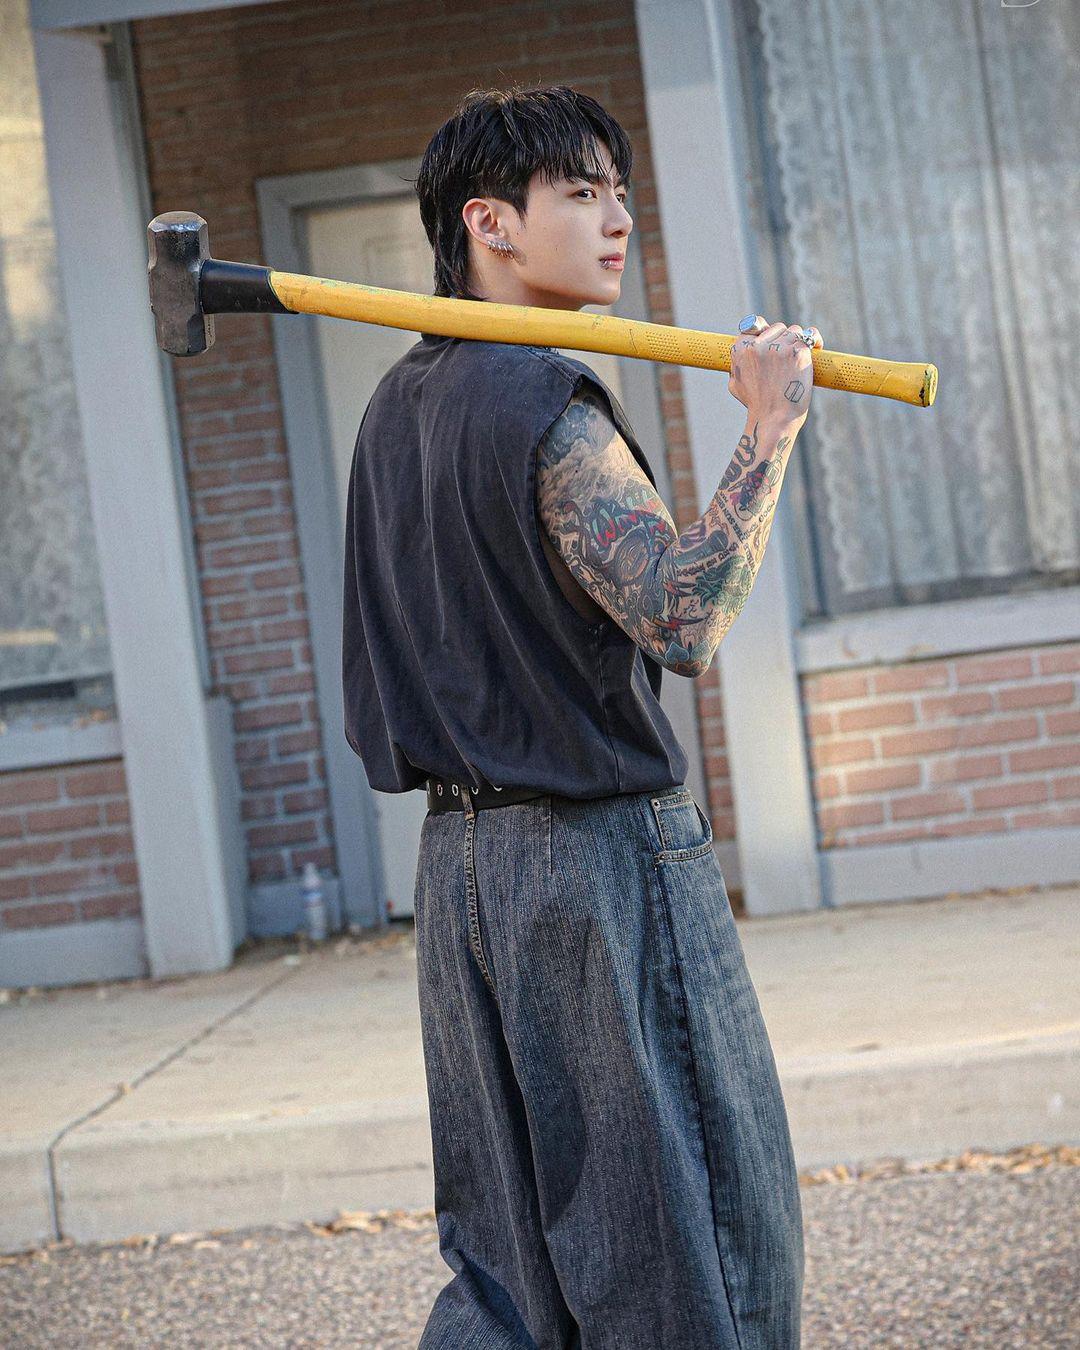 Jungkook is quite the macho man here, posing with a hammer that he used to bust open a fire hydrant in the music video